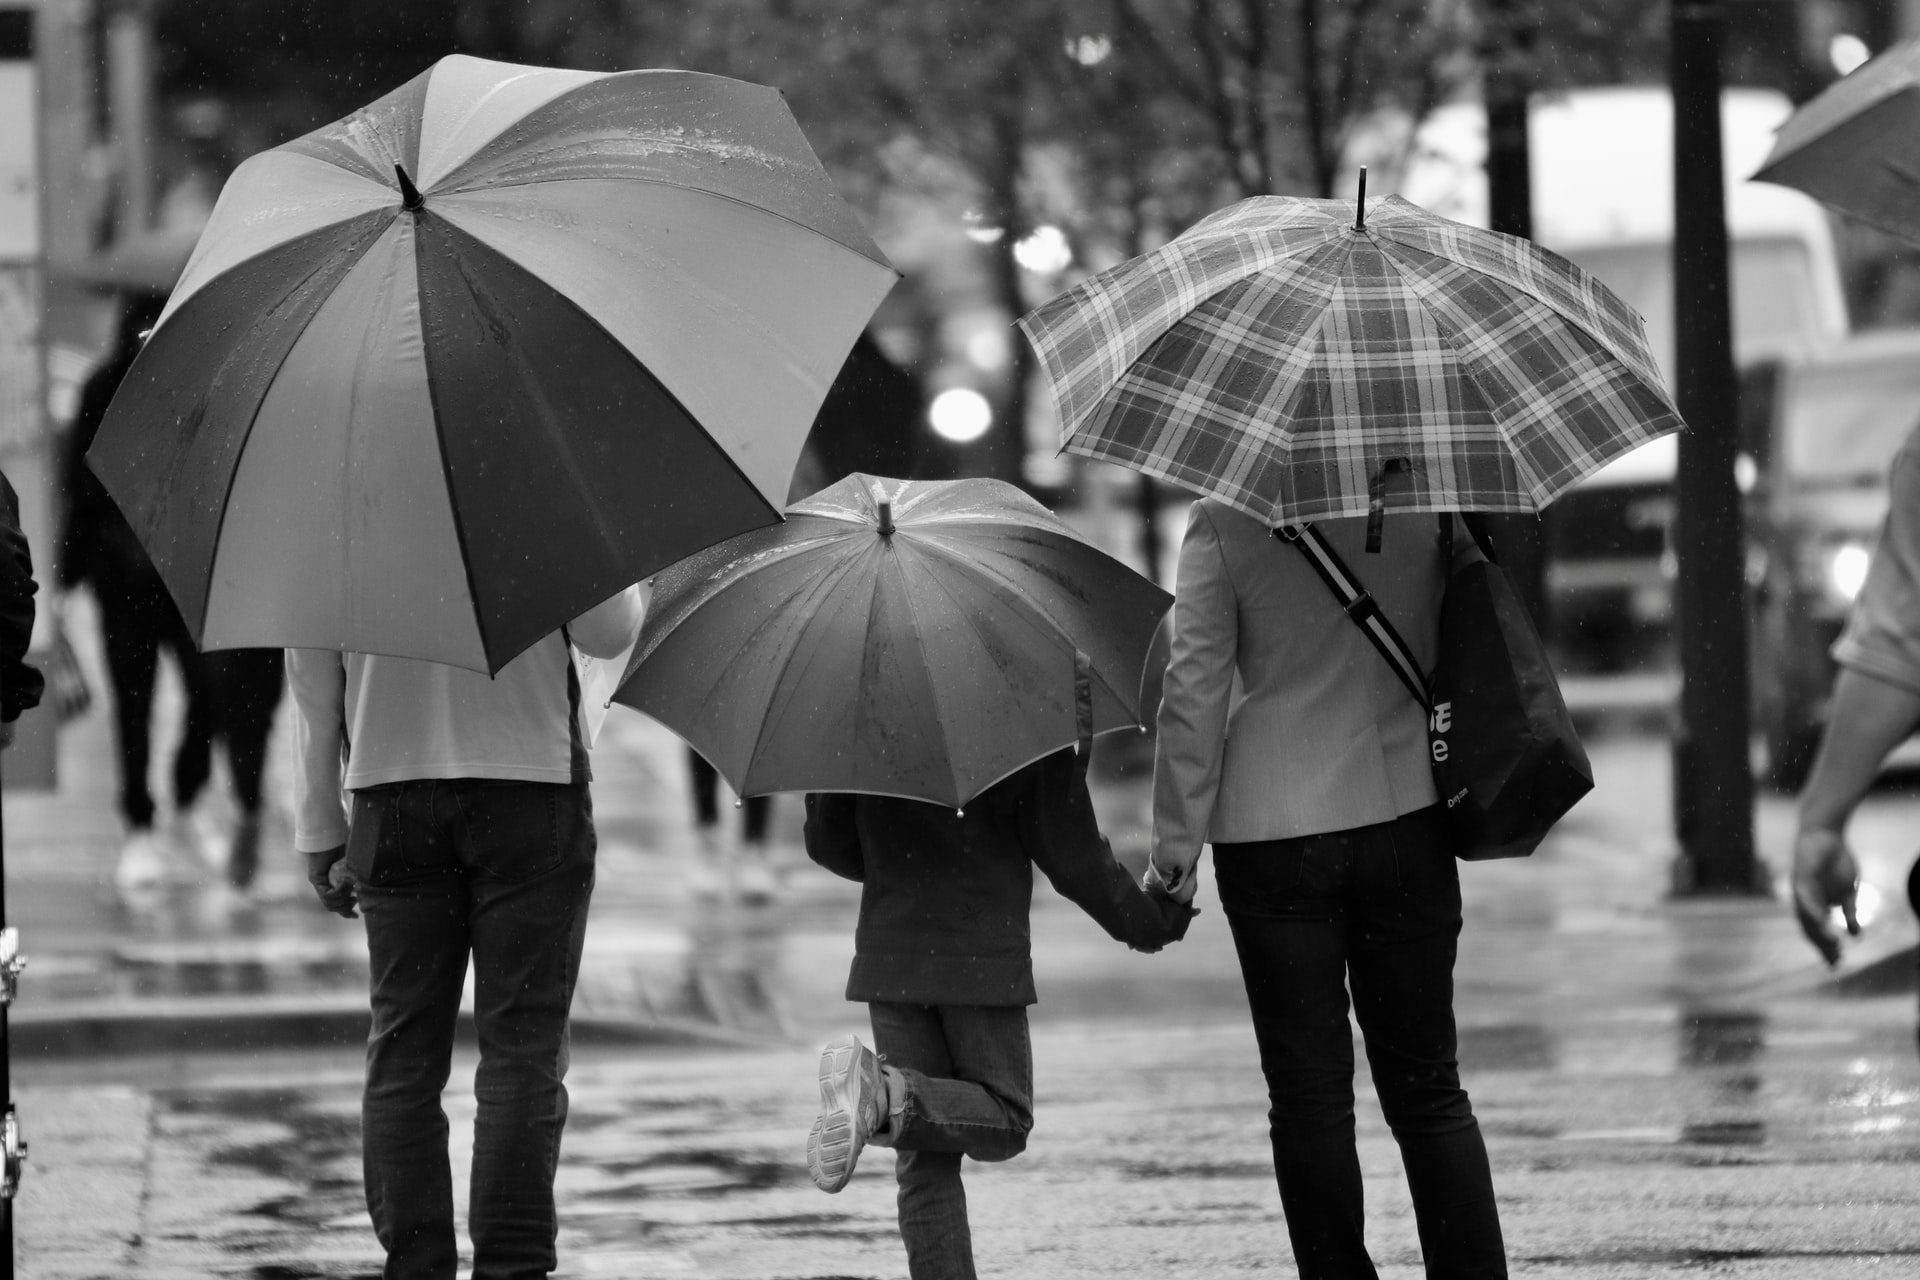 A black and white photograph of two adults and a child facing away from the camera underneath large umbrellas